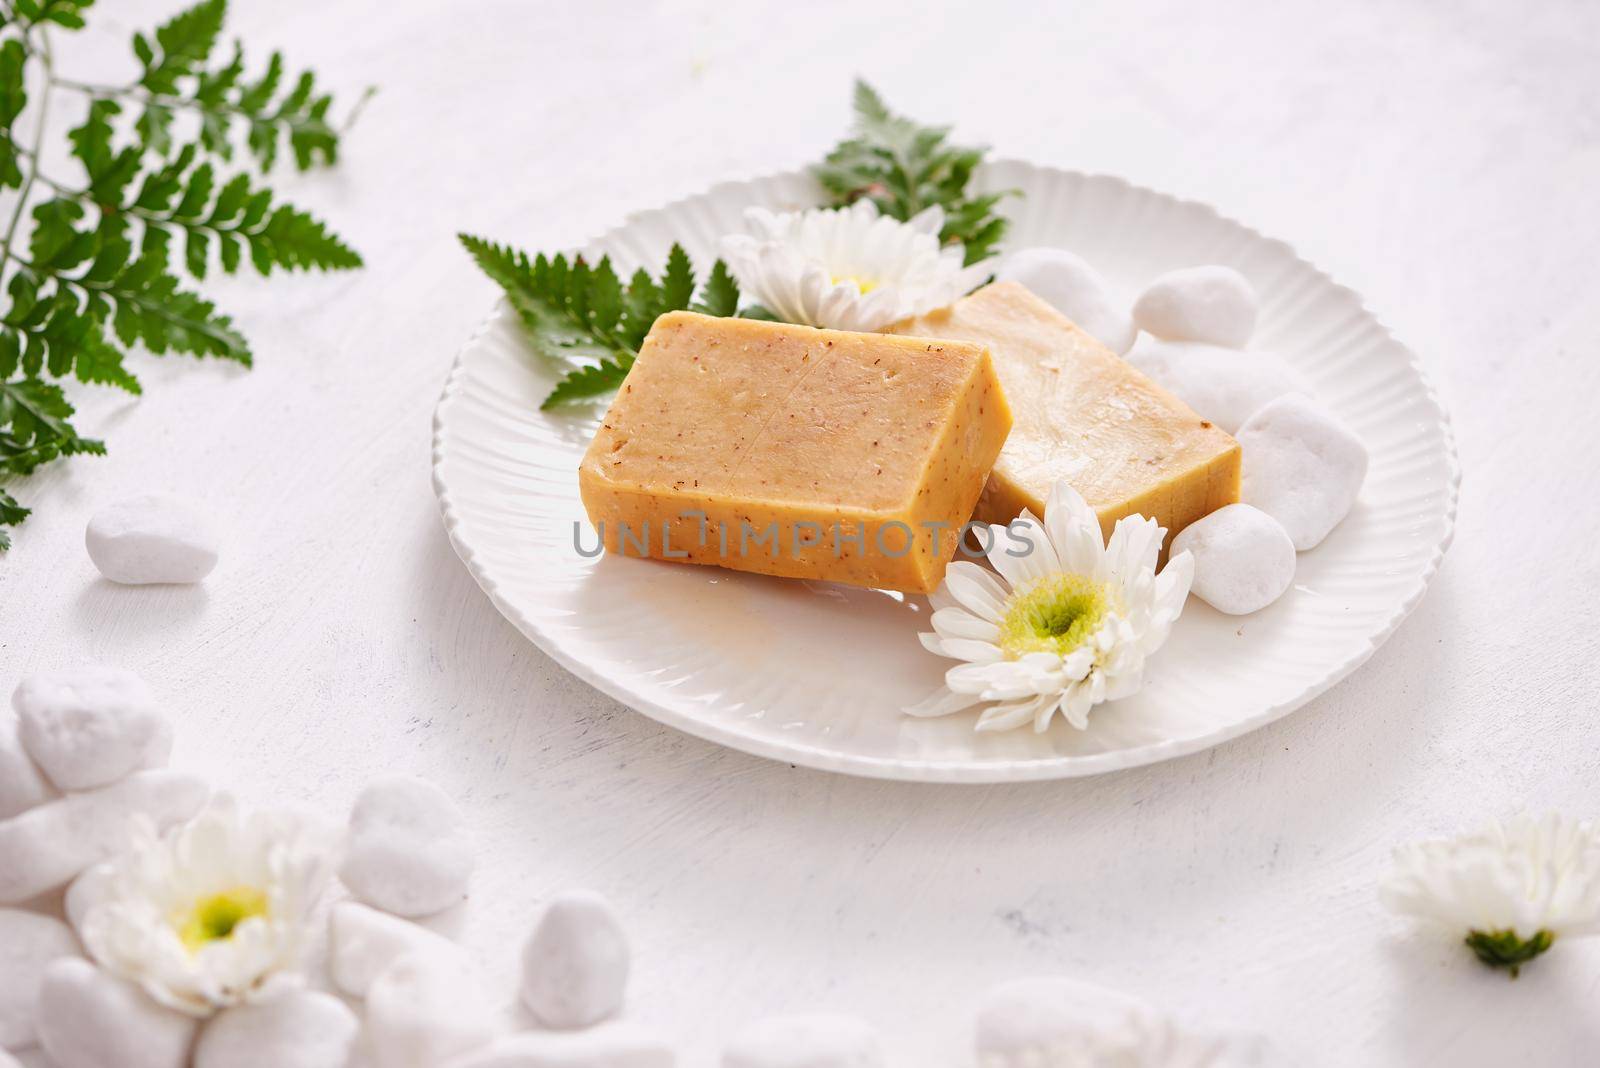 Handmade Soap closeup.Spa products by makidotvn